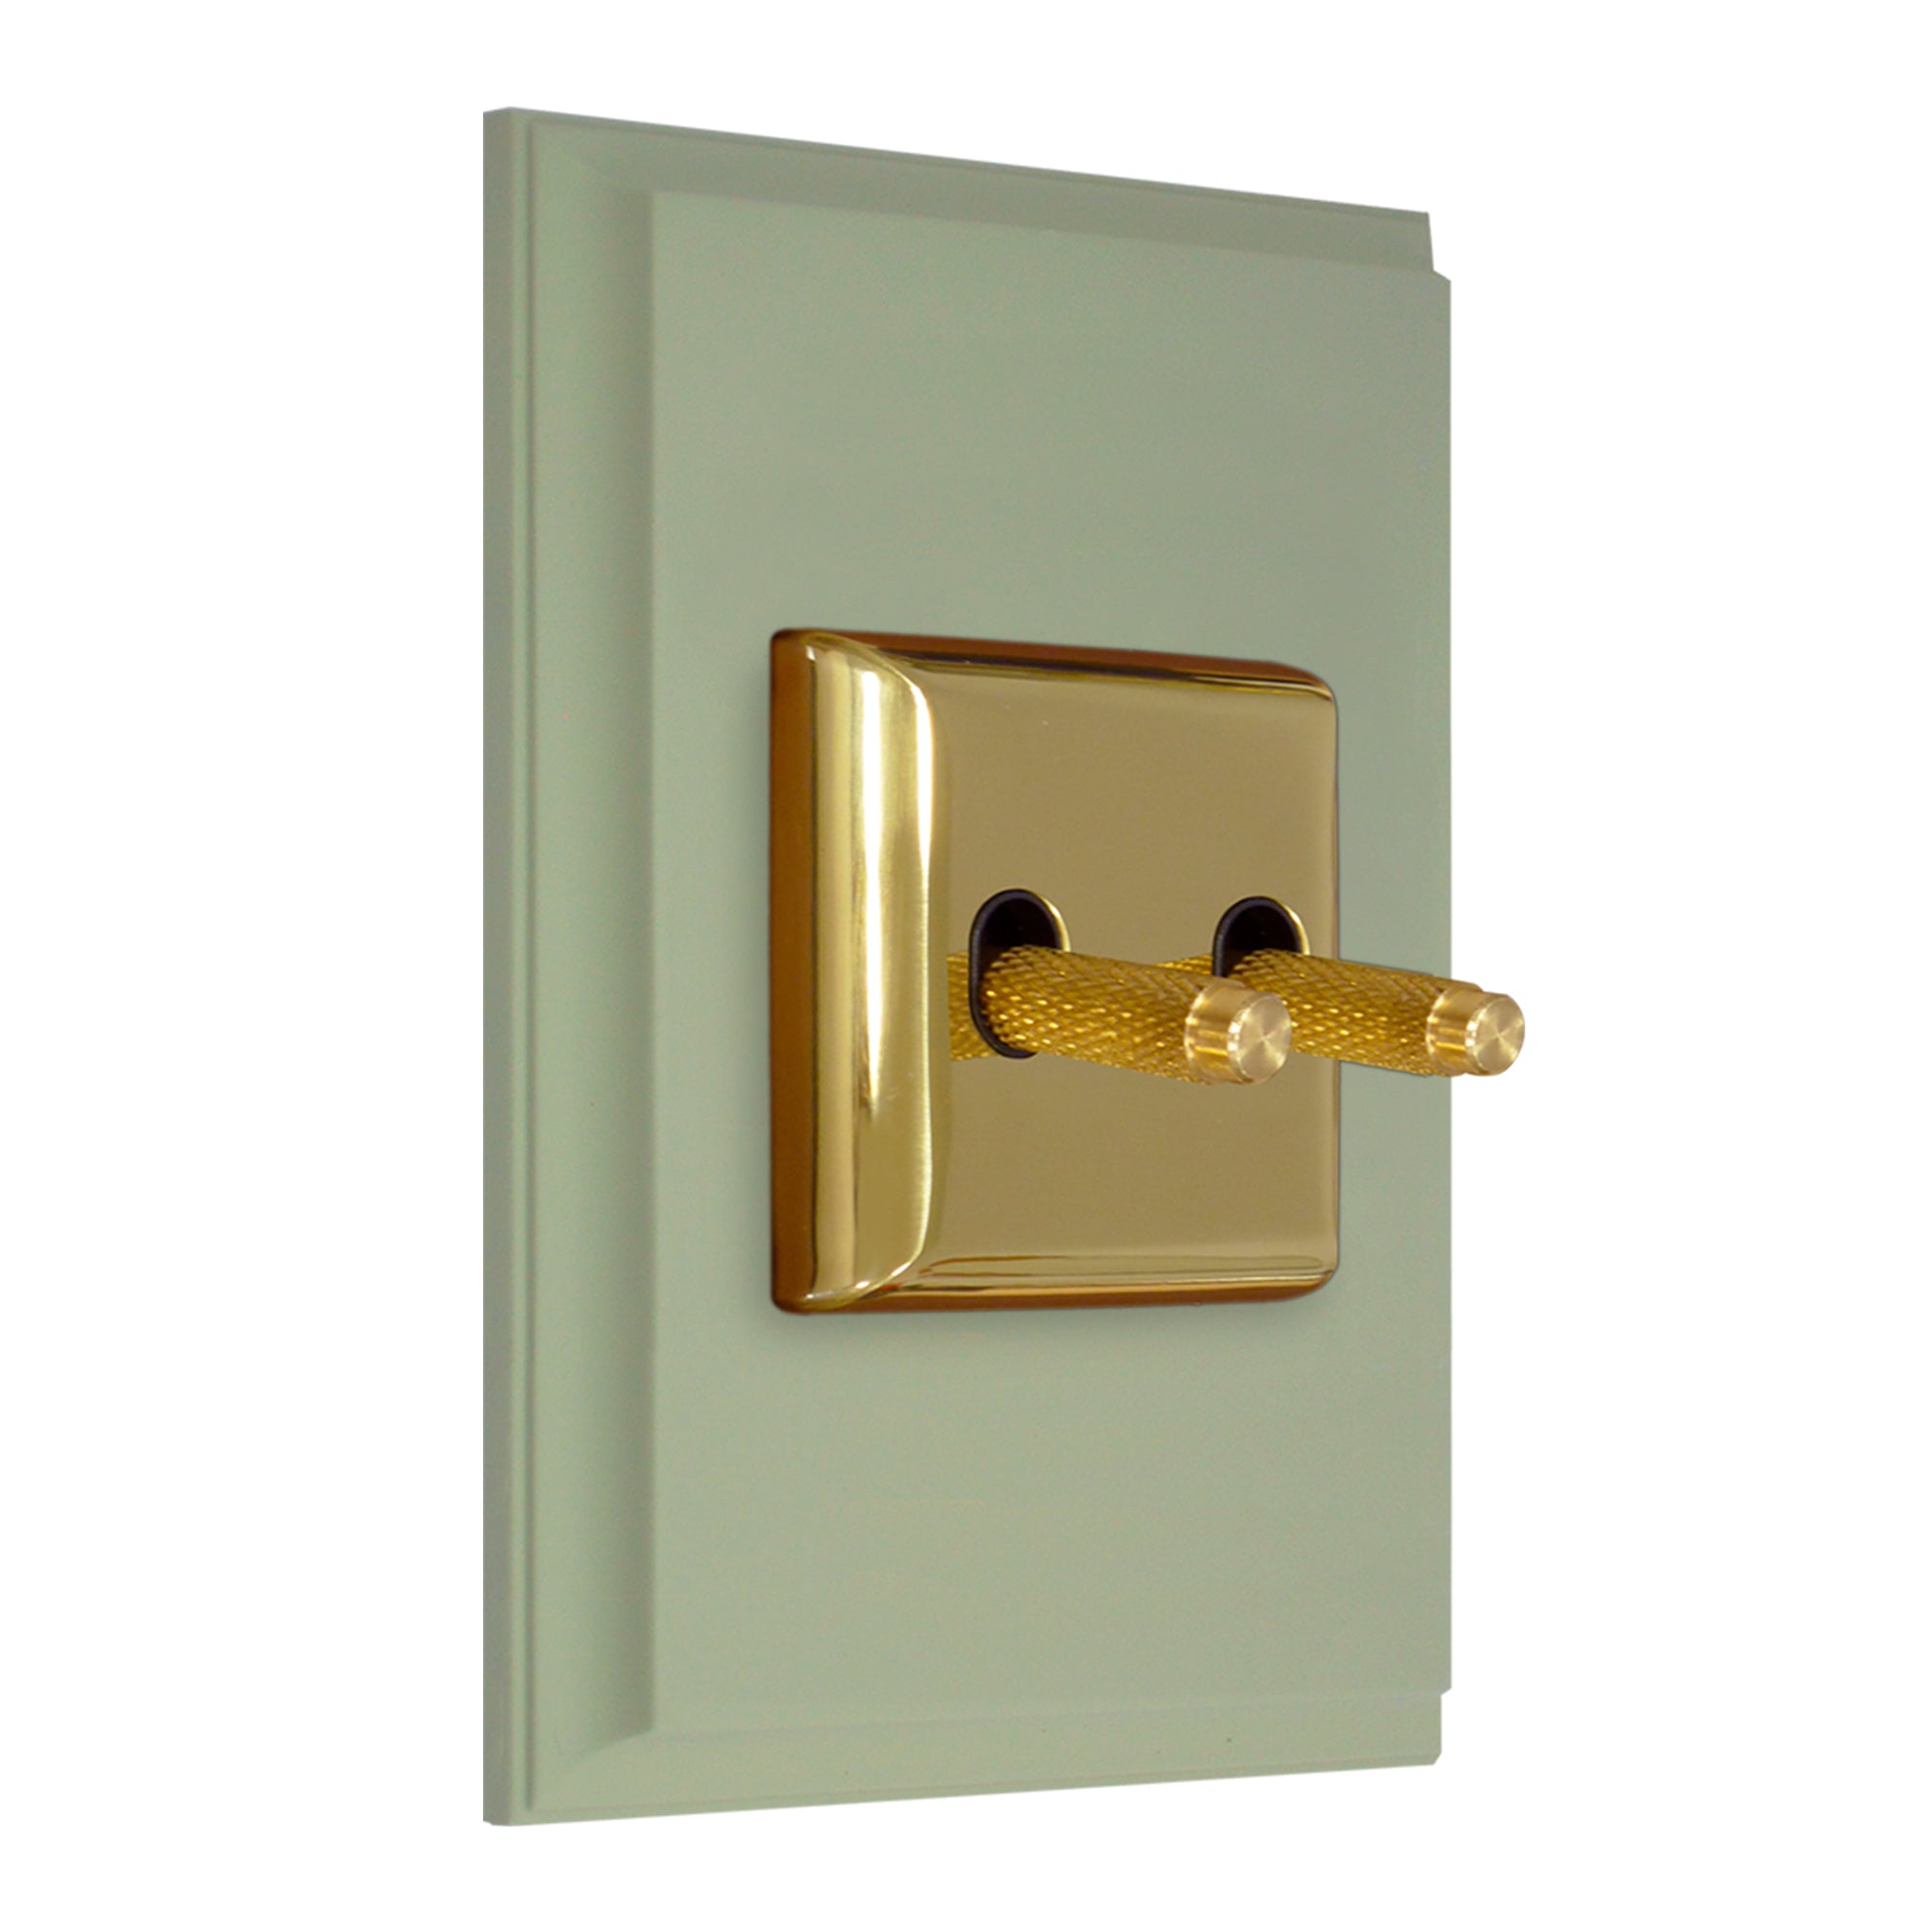 Marco double toggle light switch